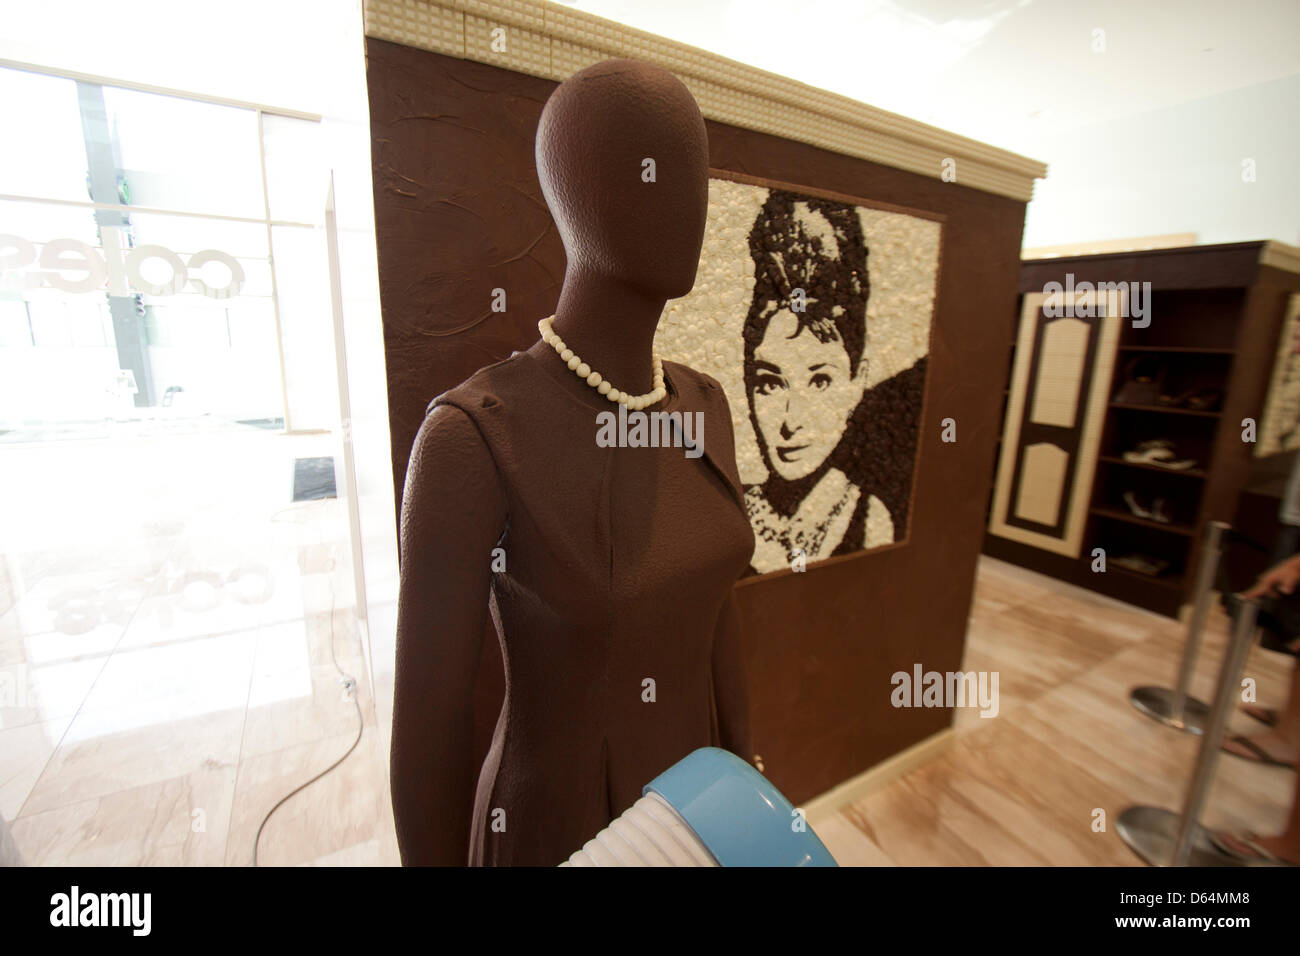 Adelaide, Australia. 12th April 2013. A mannequin and a life size walk in closet made from 100KG dark chocolate and 100KG milk chocolate  by food artist and British chocolate maker Prudence Staite for the reopening of Adelaide's Rundle Mall. Credit: amer ghazzal / Alamy Live News Stock Photo